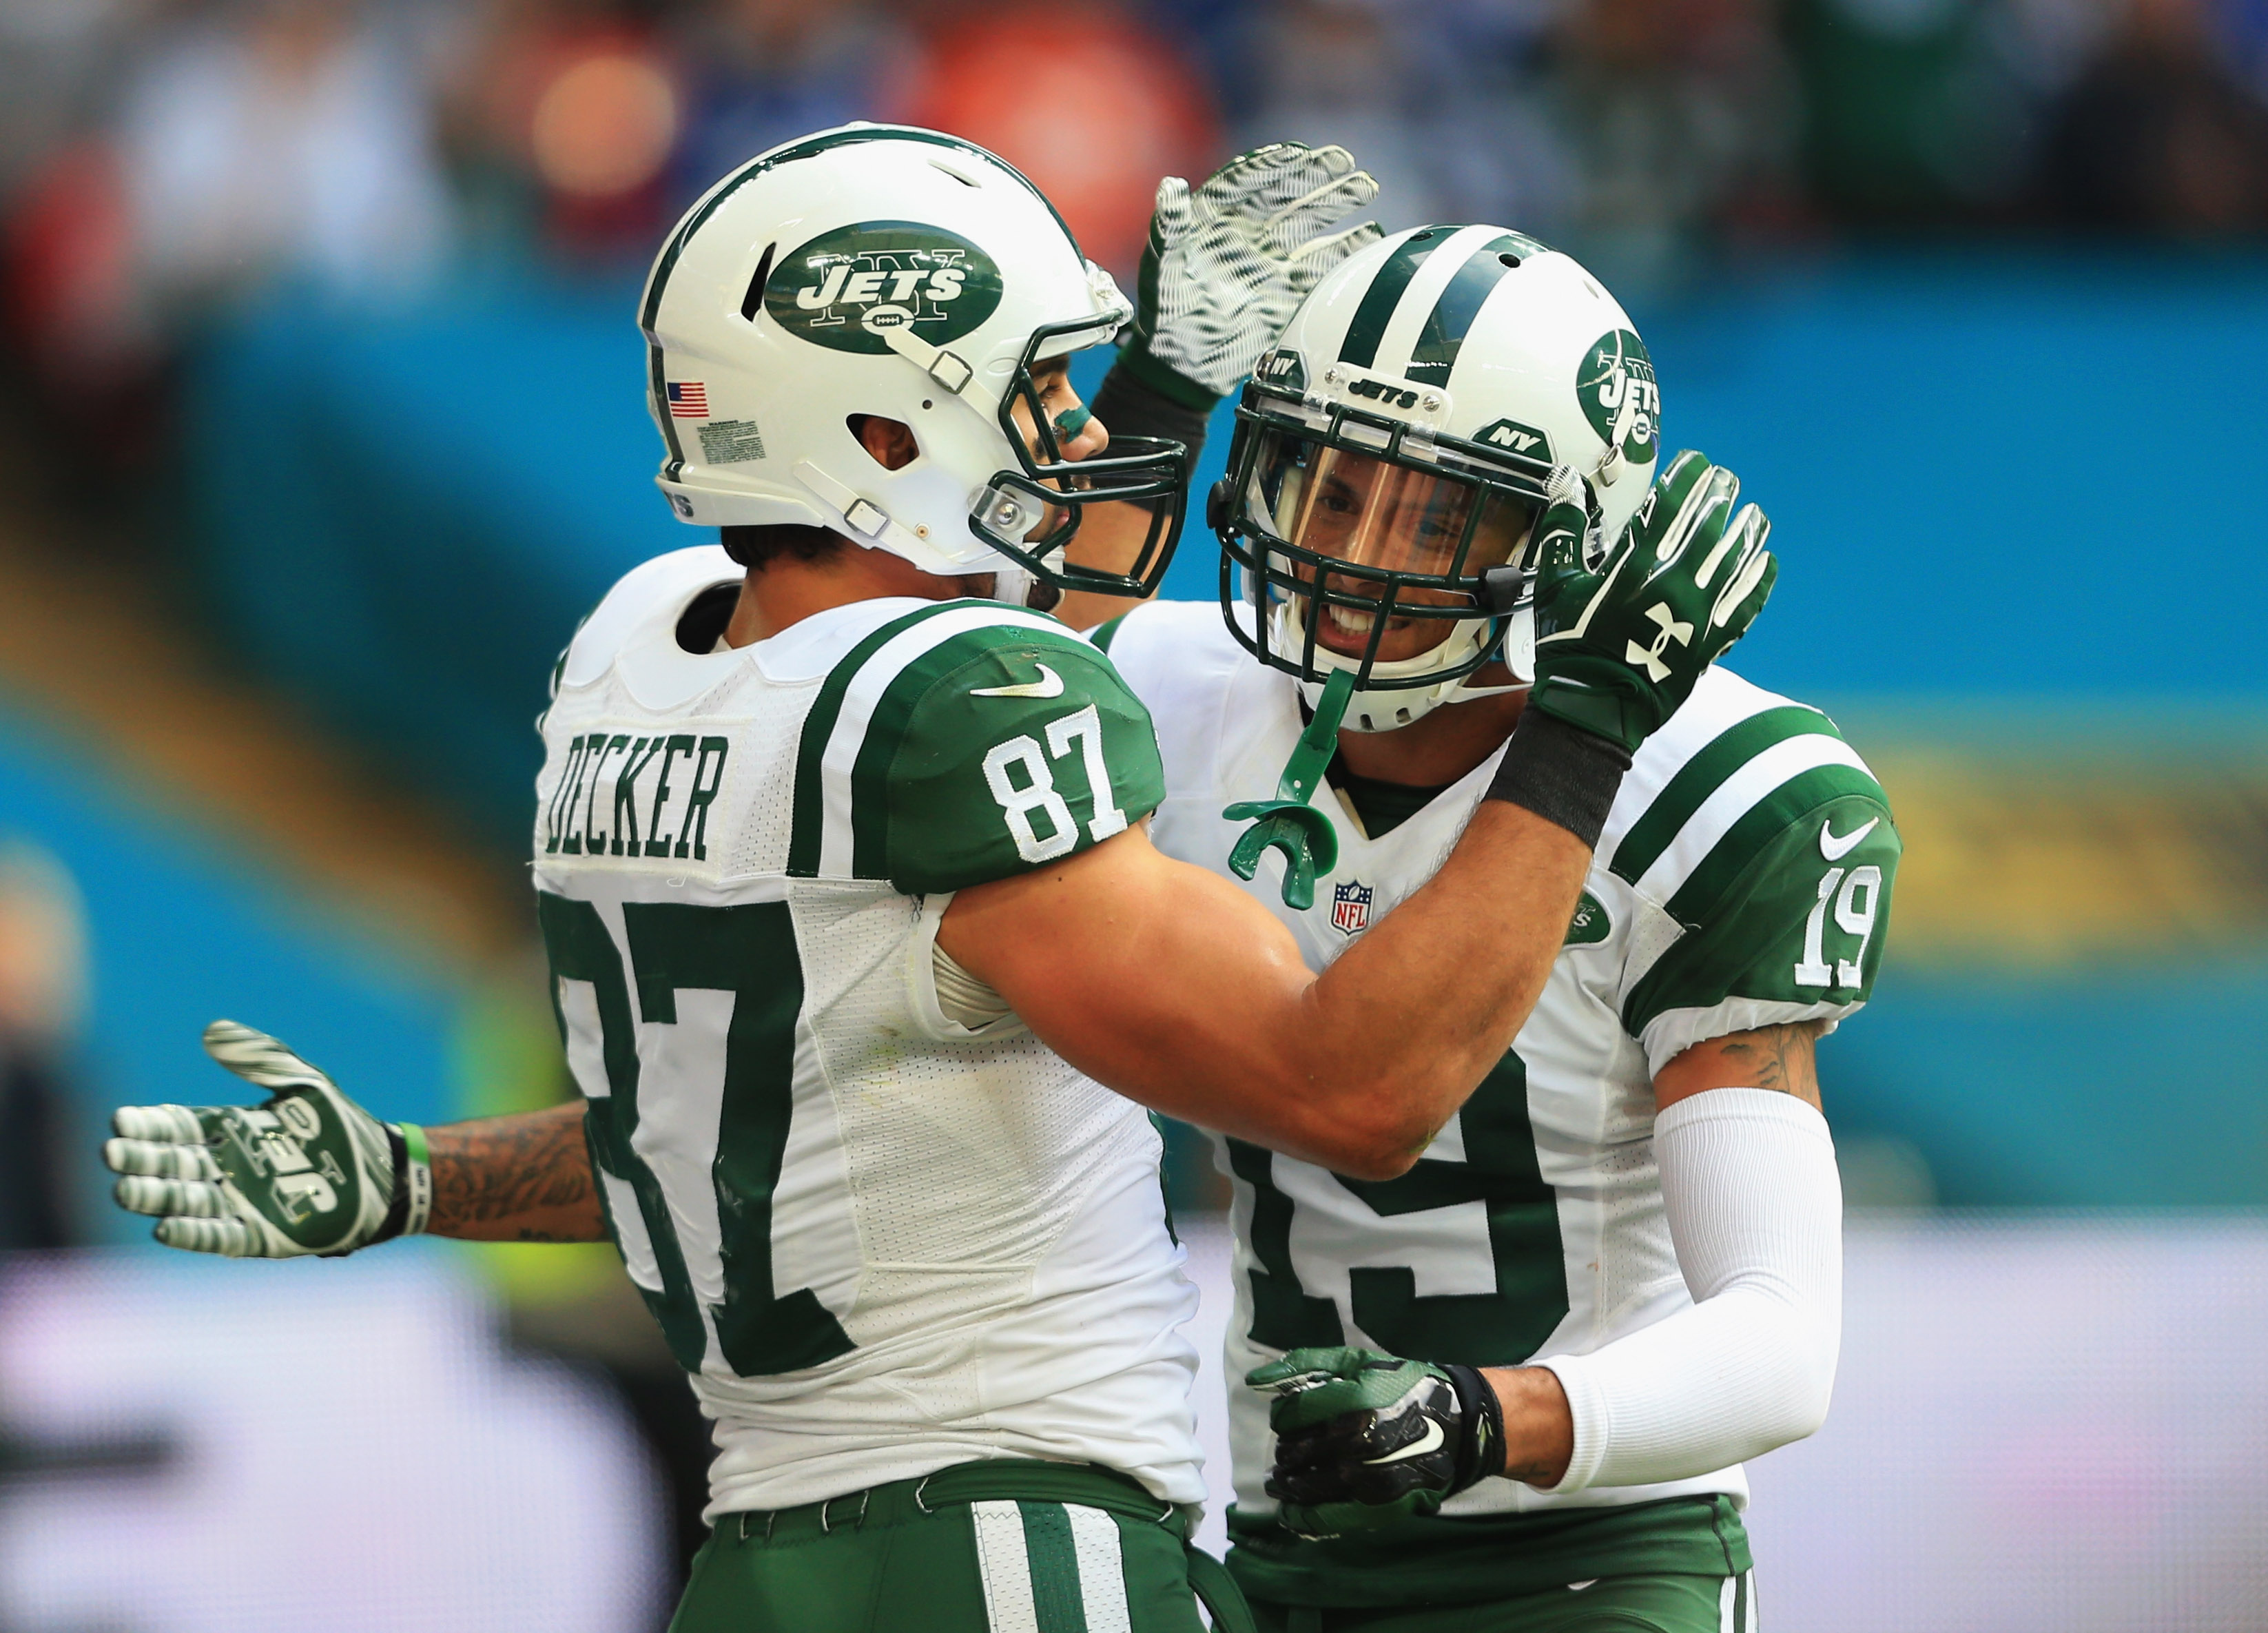 Eric Decker has had a solid first half despite playing with a knee injury. (Getty)